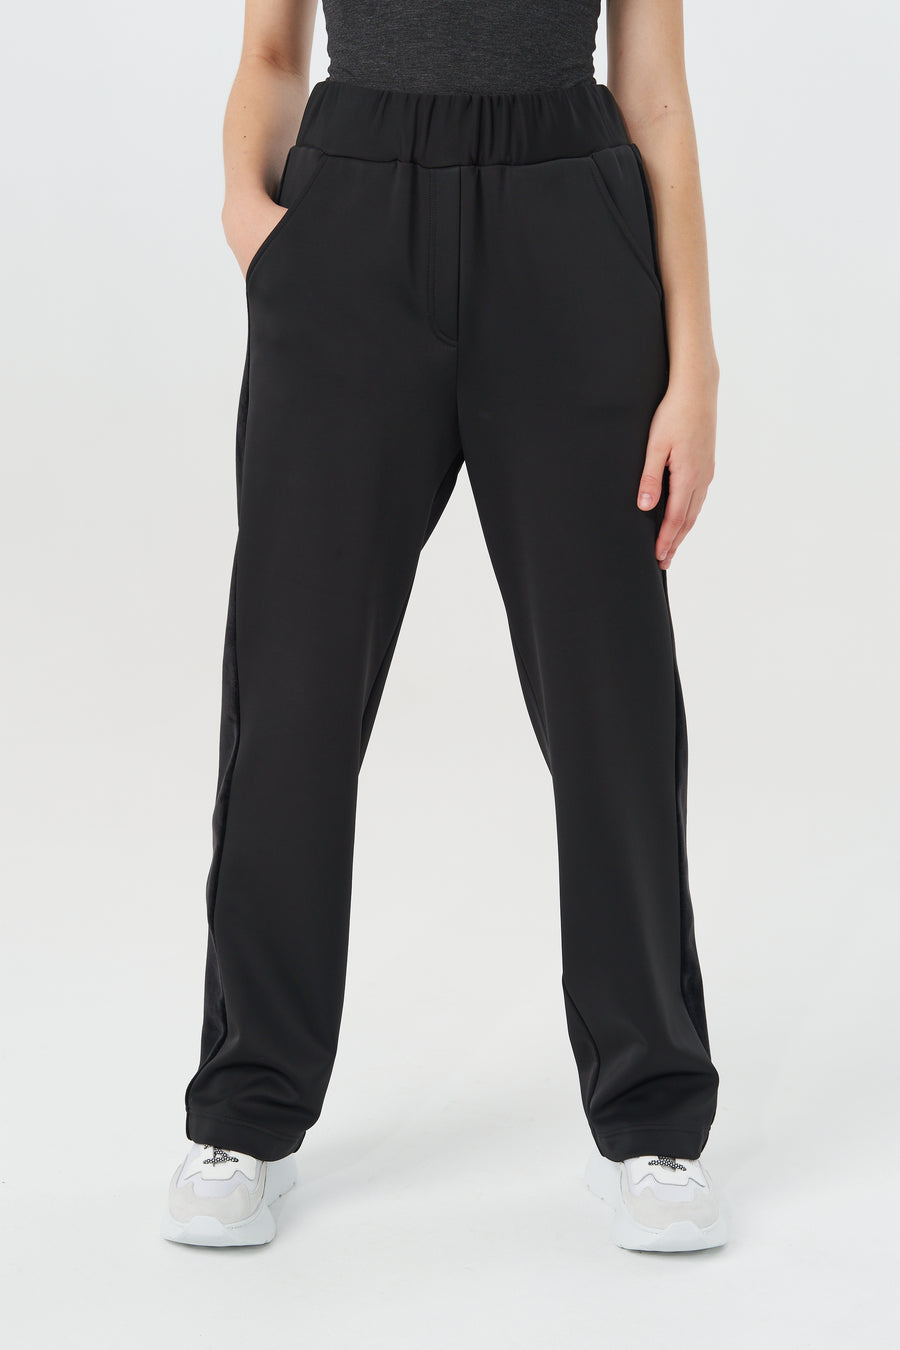 SICILY TROUSERS